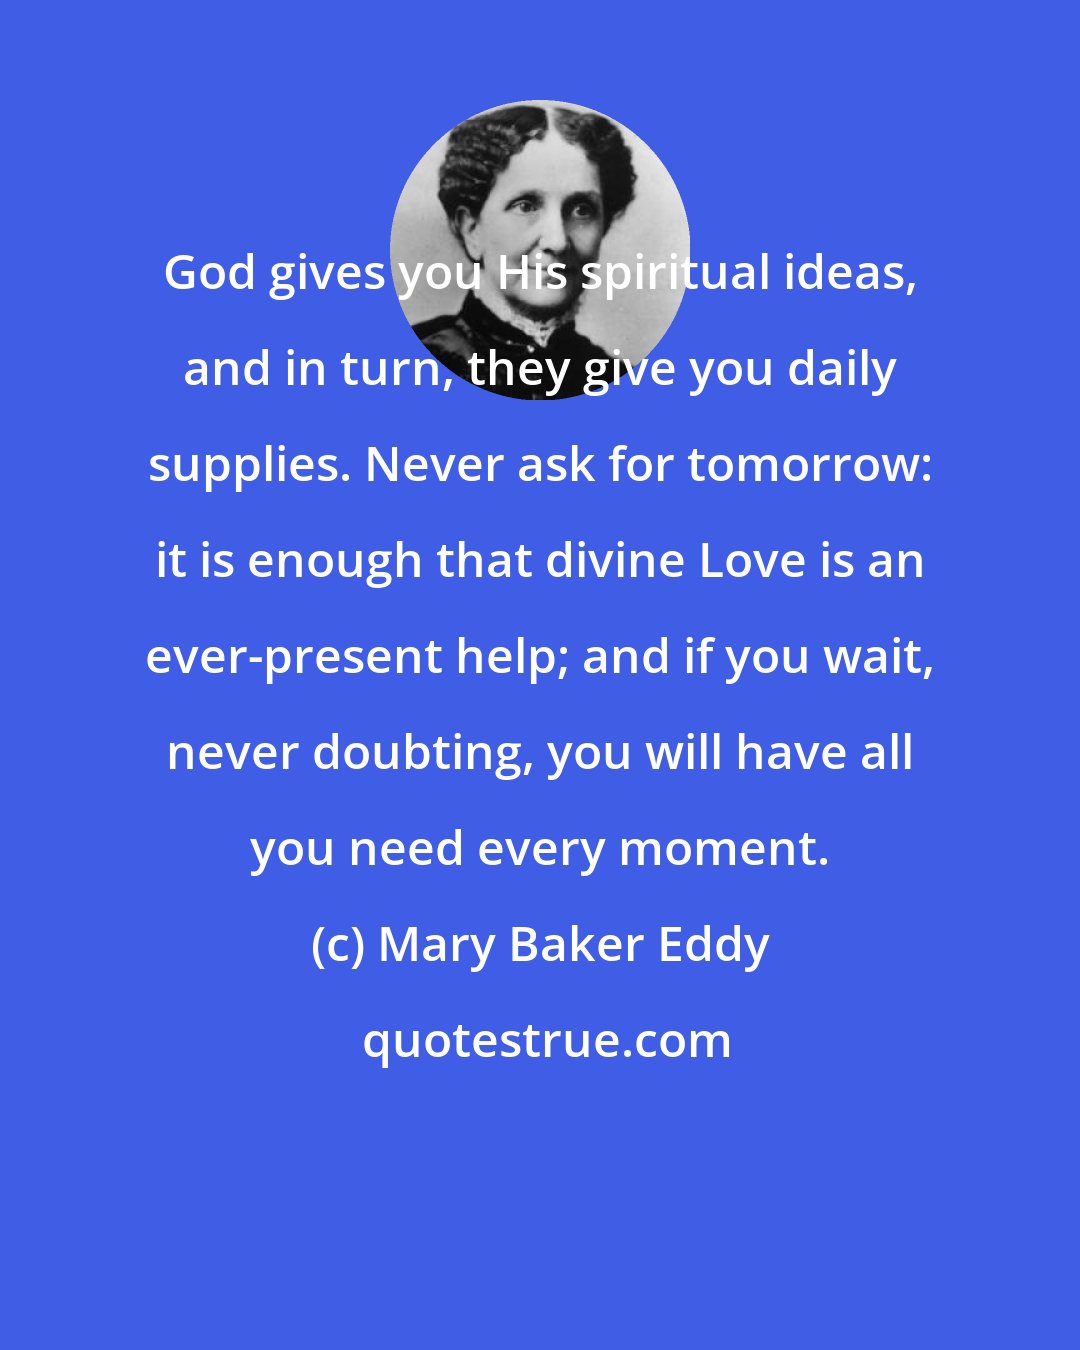 Mary Baker Eddy: God gives you His spiritual ideas, and in turn, they give you daily supplies. Never ask for tomorrow: it is enough that divine Love is an ever-present help; and if you wait, never doubting, you will have all you need every moment.